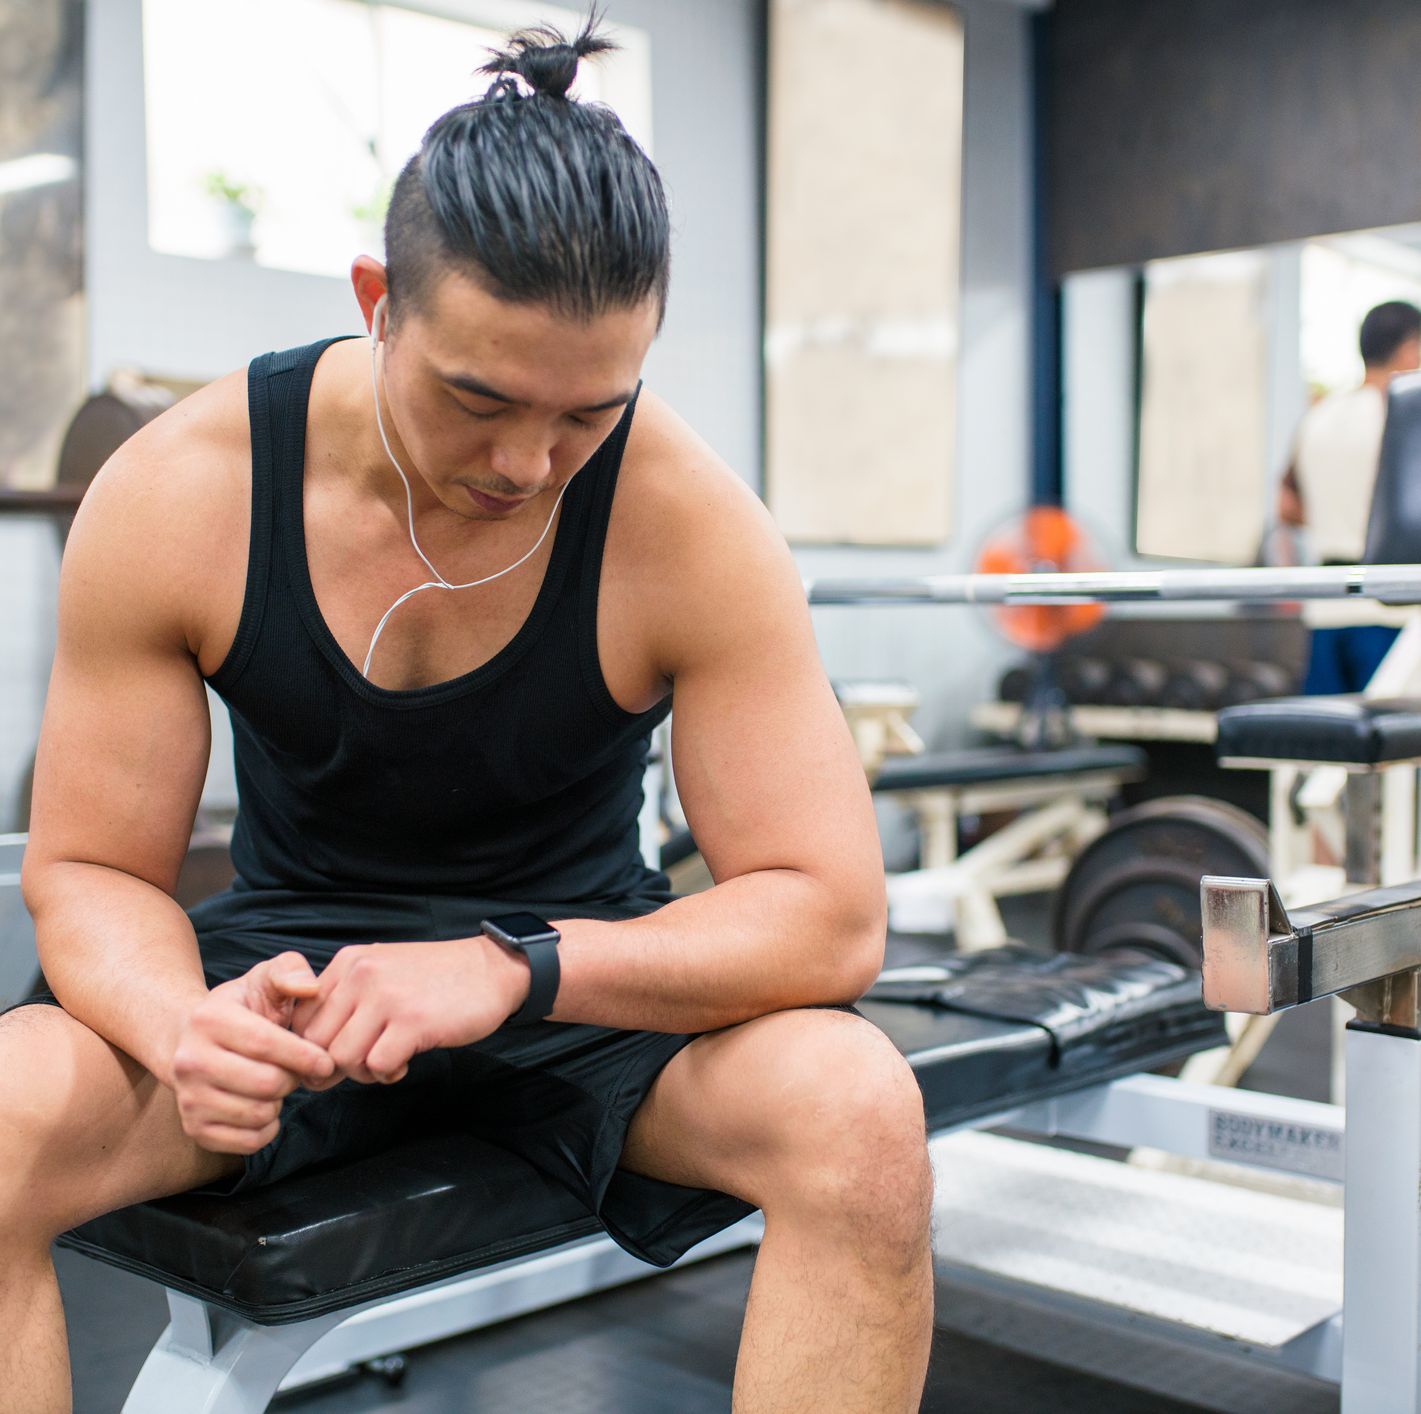 How Long Should I Rest Between Sets to Crush My Workout Goals?